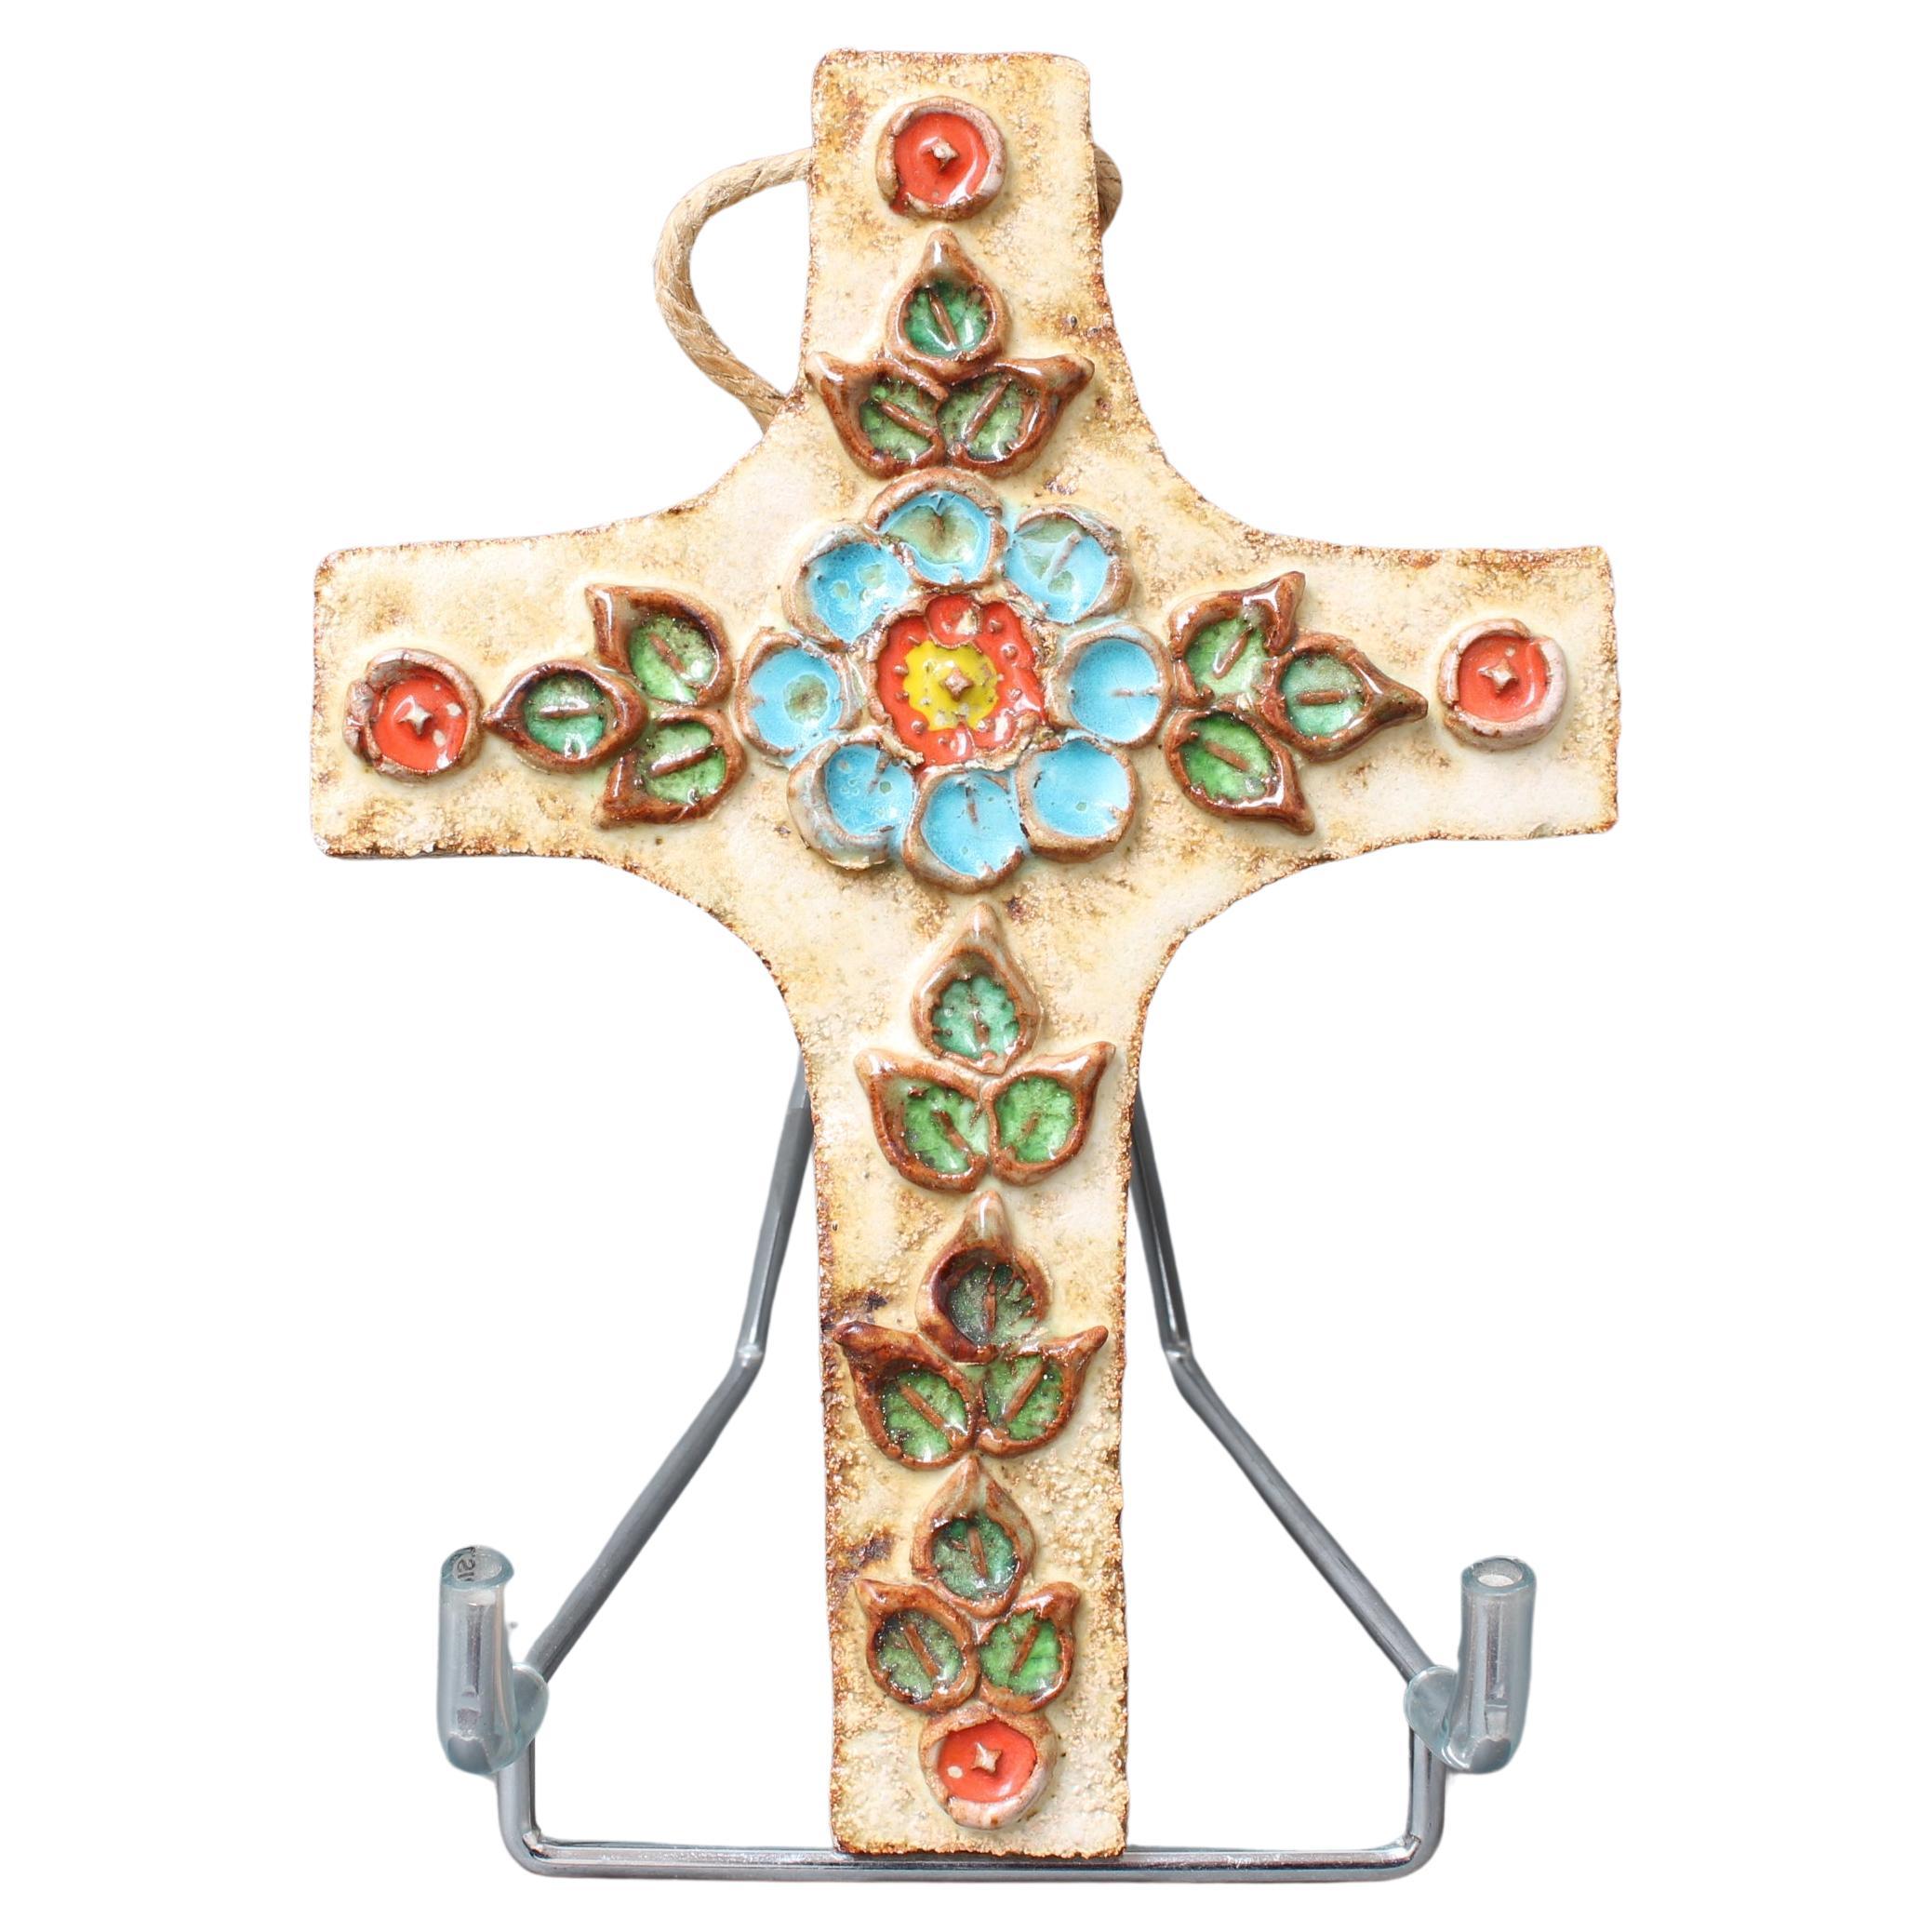 Vintage French Ceramic Flower-Motif Cross by La Roue (circa 1960s) For Sale